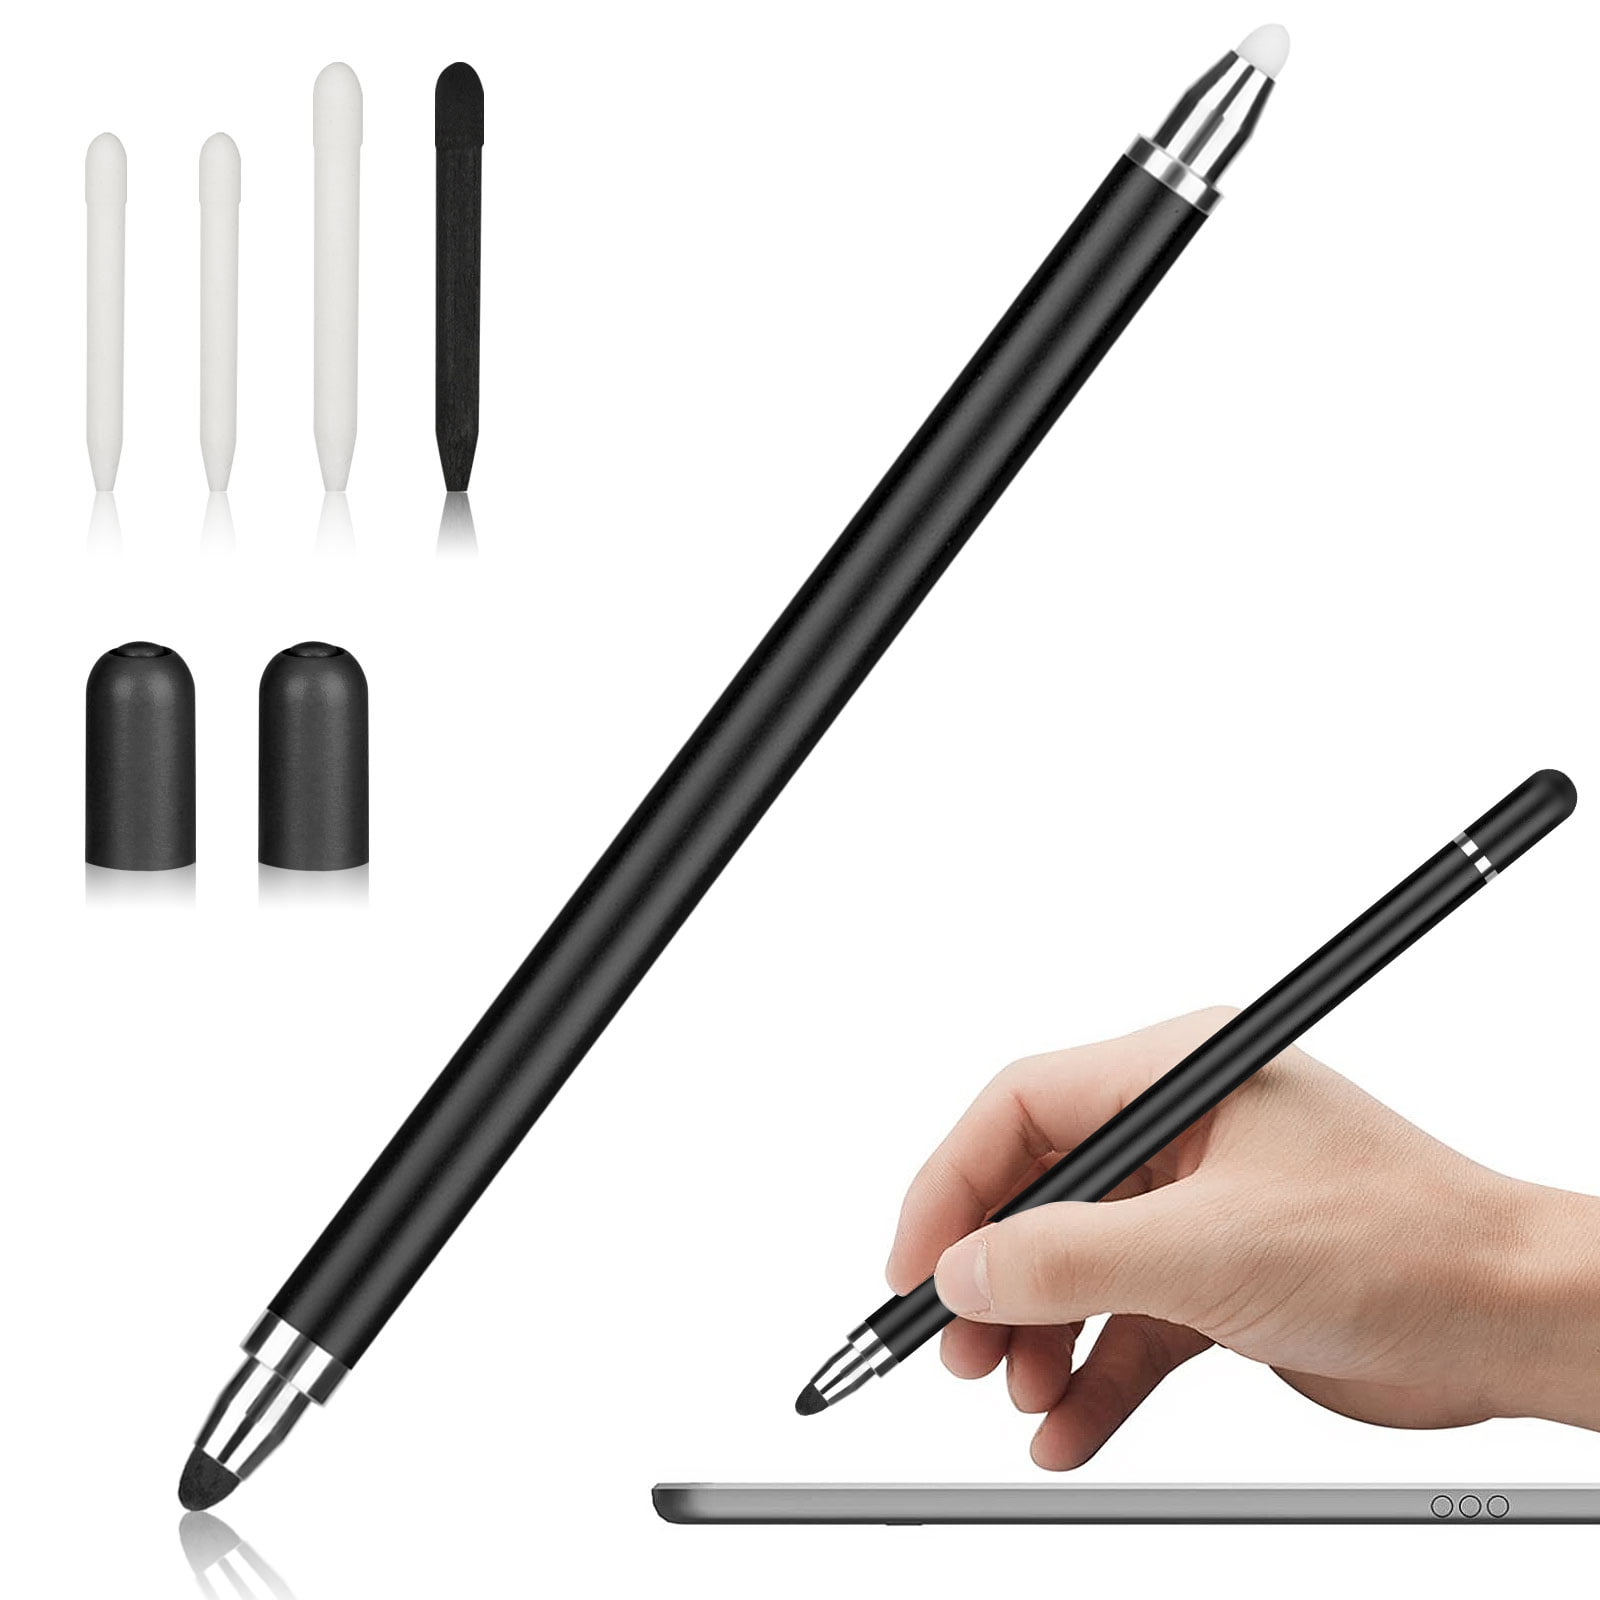 Stylus Black White Red Alloy Pen Drawing Design Tablet and Mobile Phone Universal Color : Black 